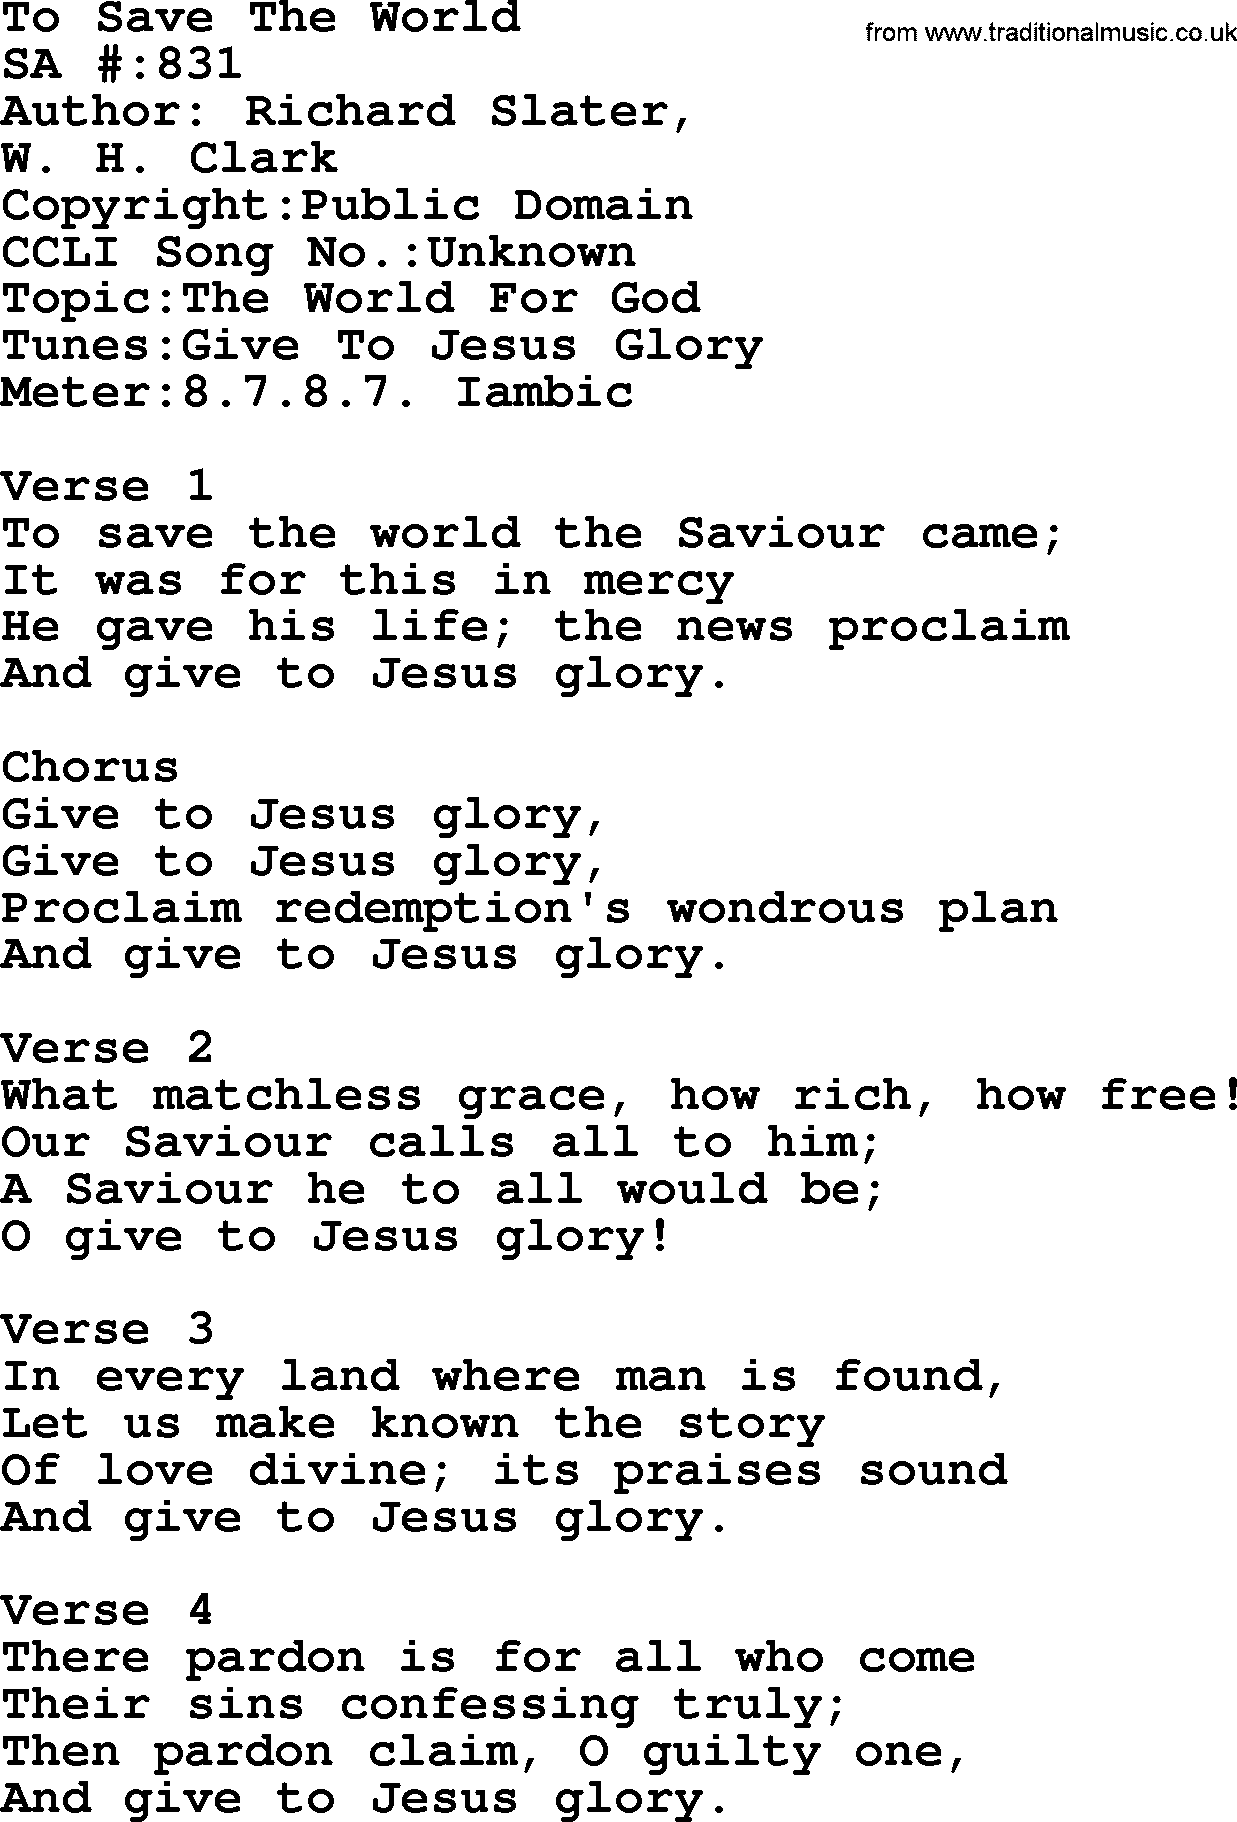 Salvation Army Hymnal, title: To Save The World, with lyrics and PDF,